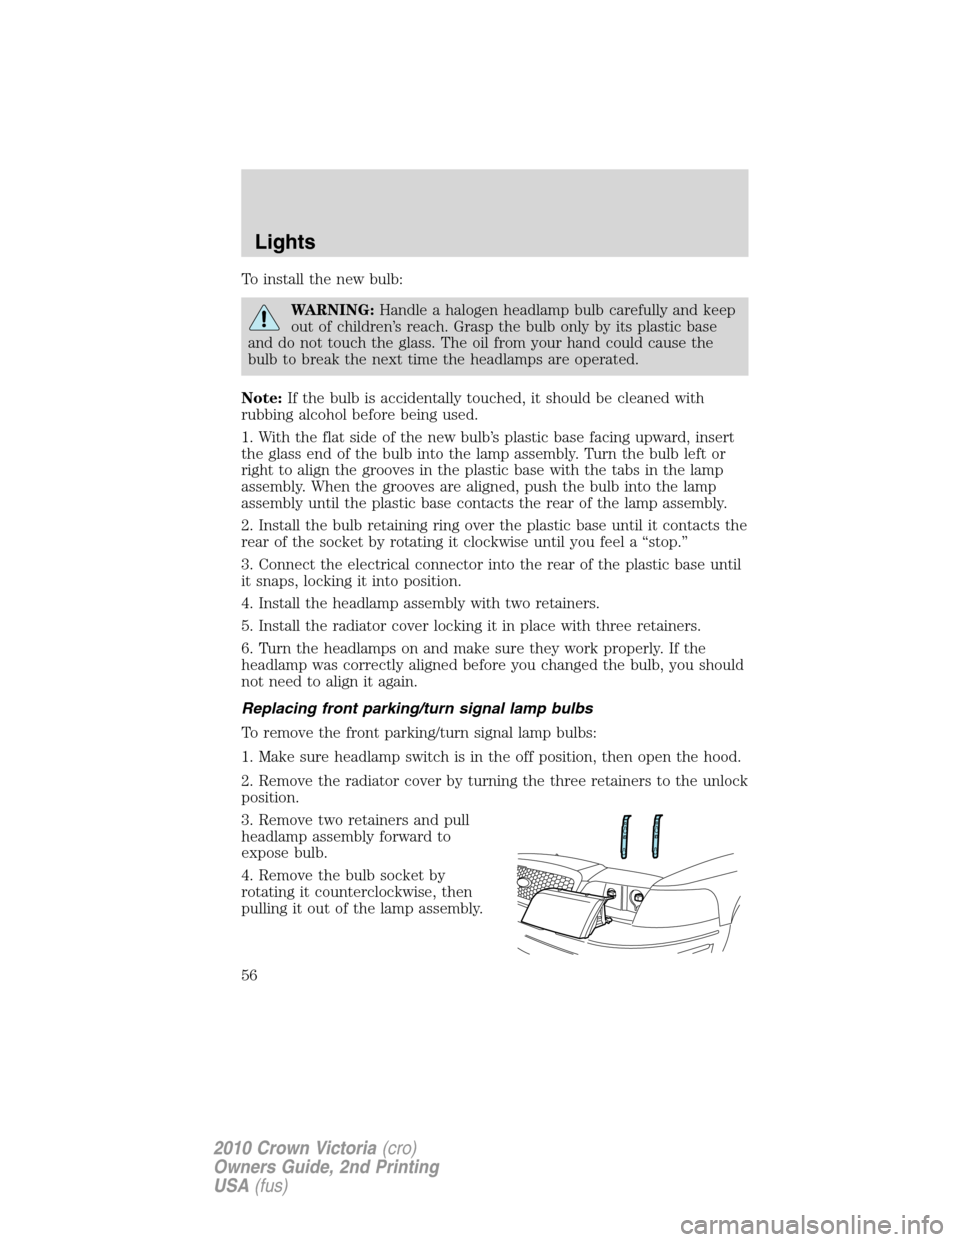 Mercury Grand Marquis 2010  Owners Manuals To install the new bulb:
WARNING:Handle a halogen headlamp bulb carefully and keep
out of children’s reach. Grasp the bulb only by its plastic base
and do not touch the glass. The oil from your hand